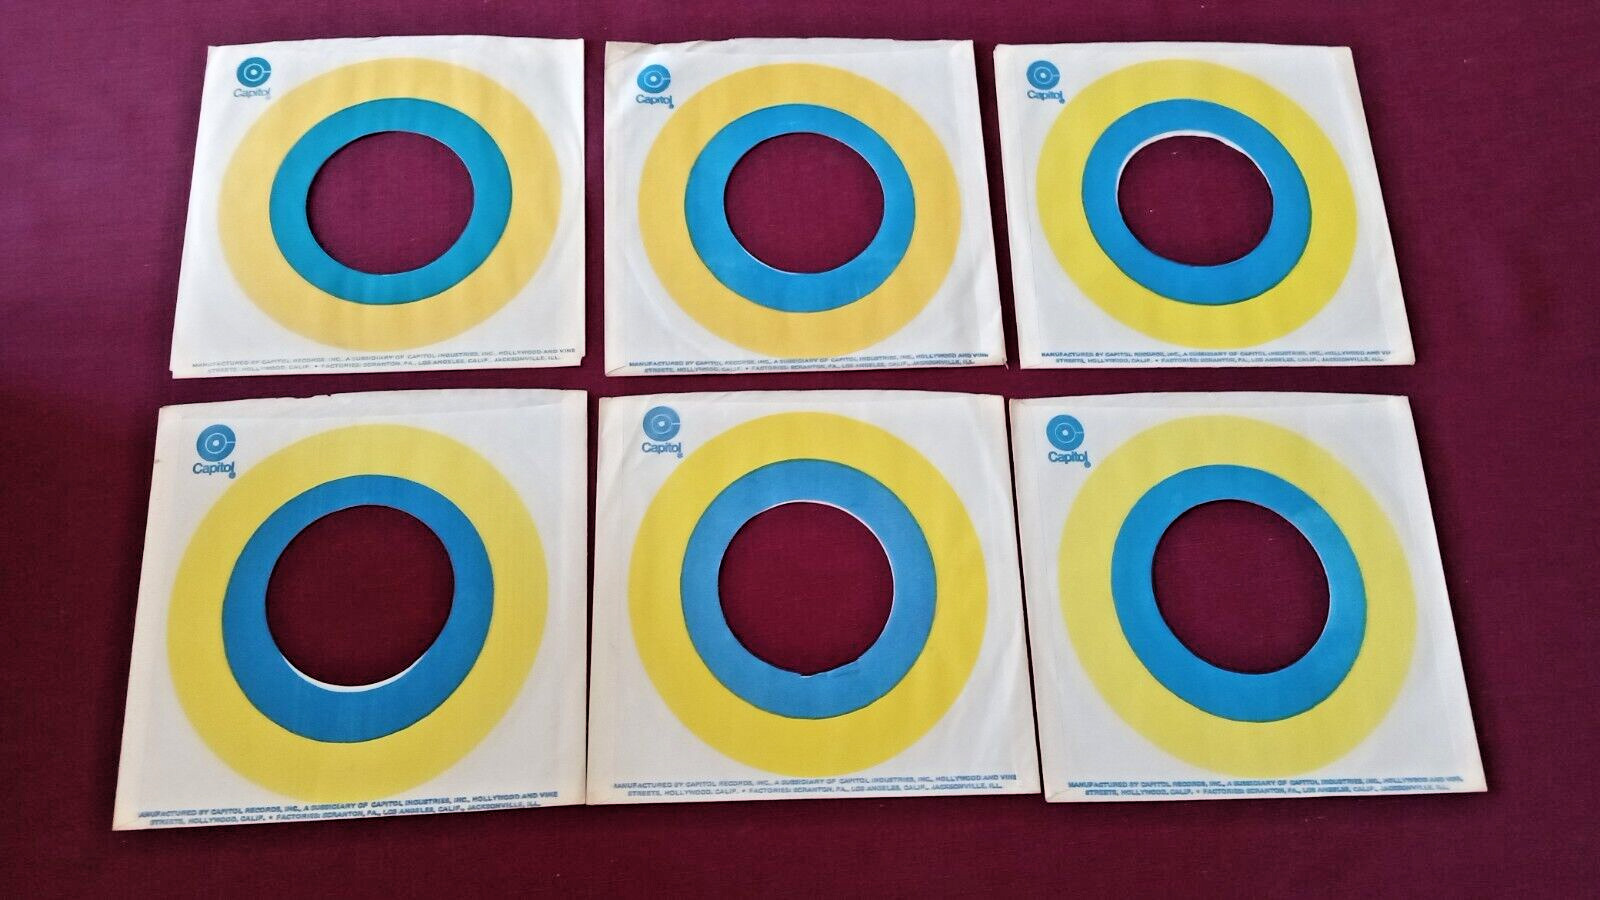 Lot of 6 CAPITOL Company Sleeves for 45 RPM RECORDS (Yellow/Blue Vintage 1970)